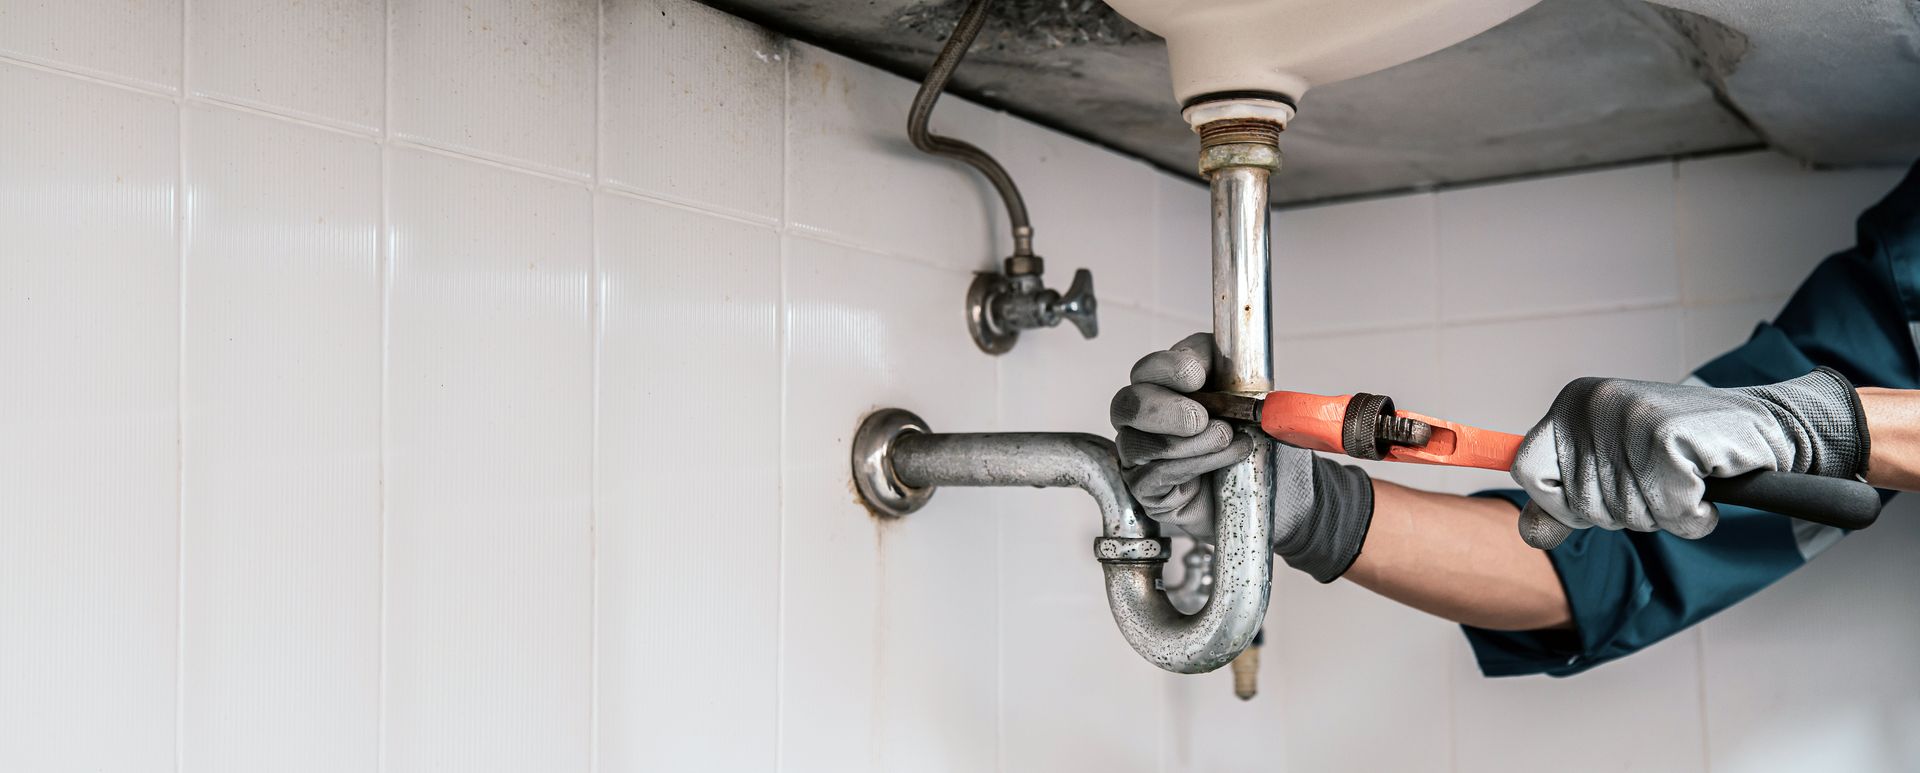 Plumbers In Cleveland Ohio